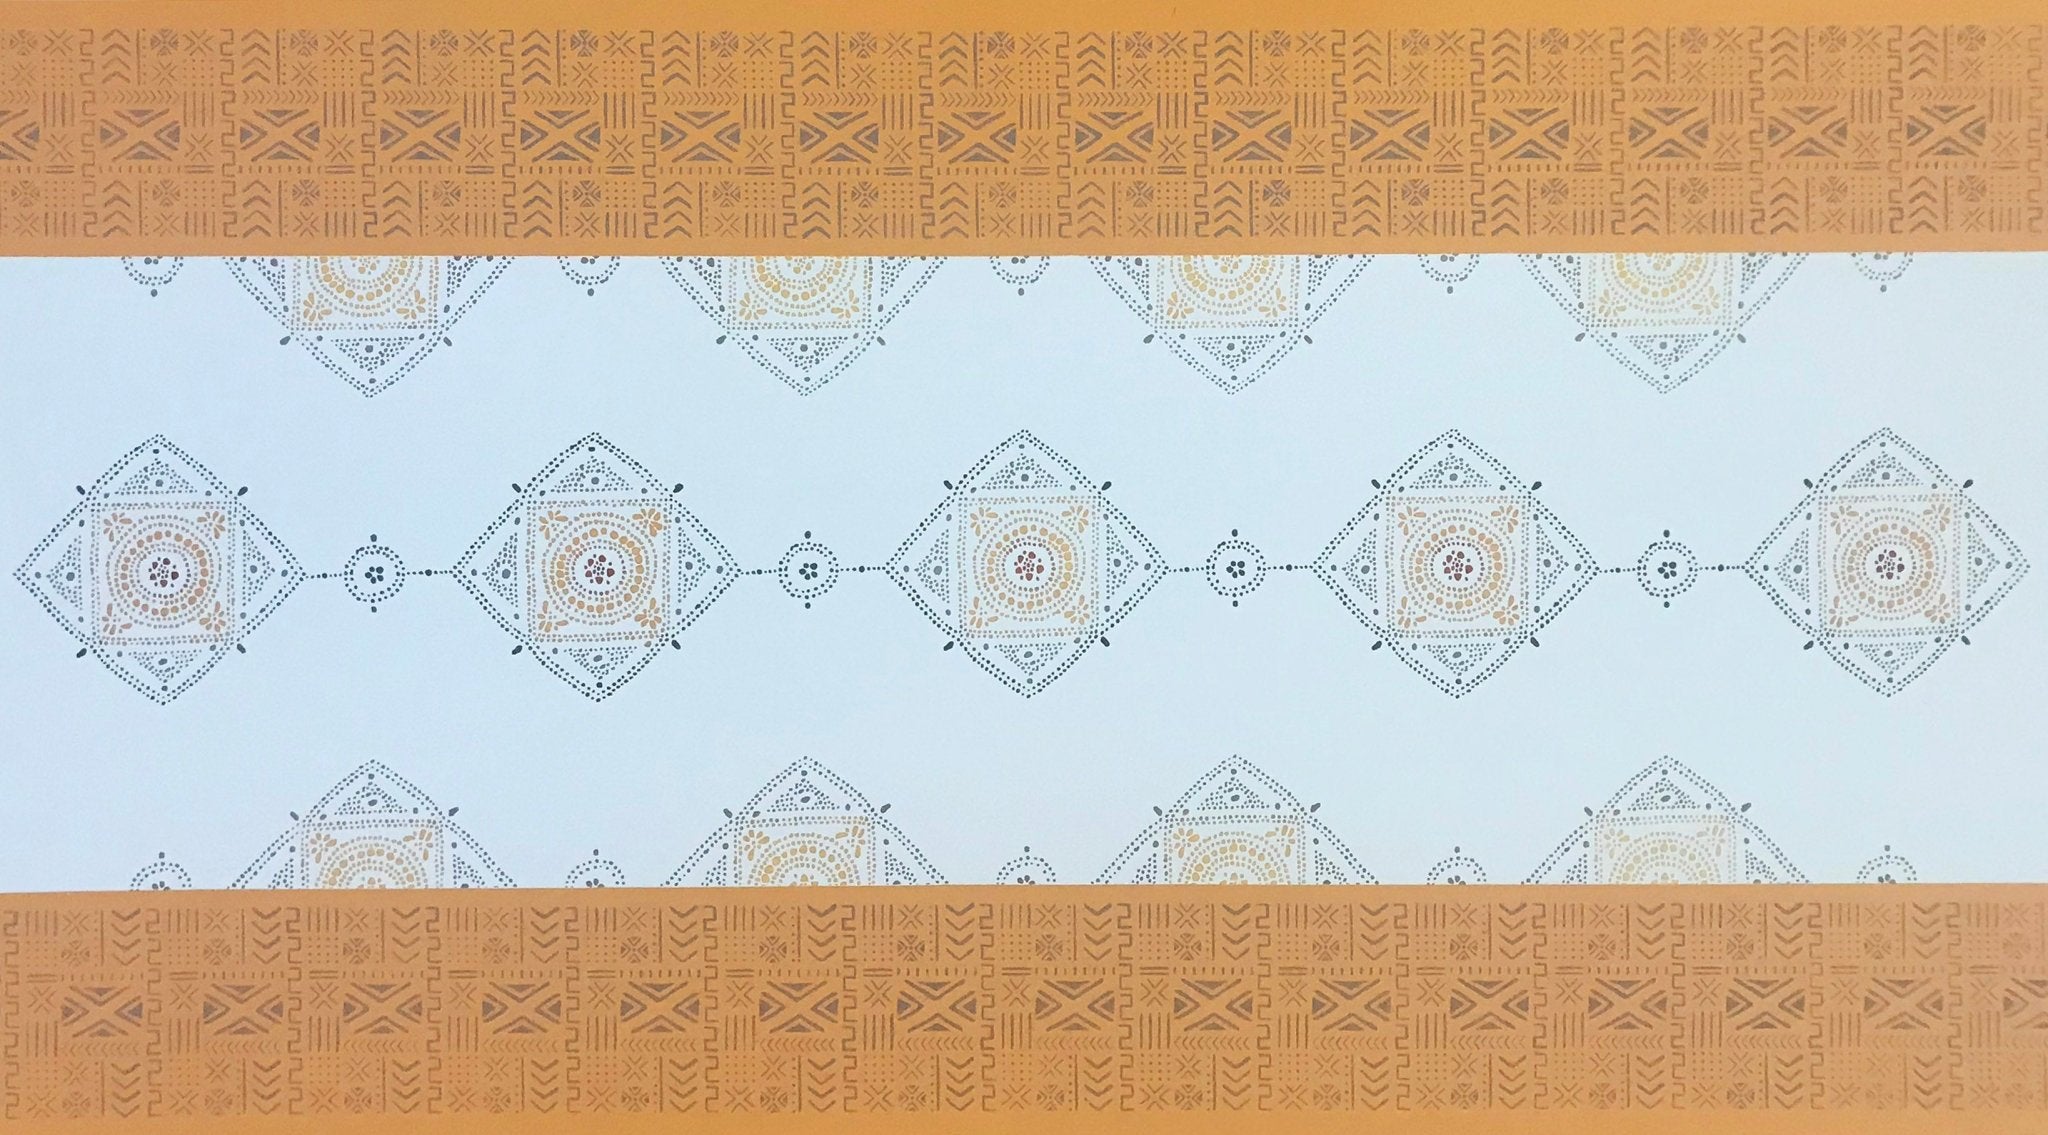 Full image of Mudcloth Floorcloth #1 with a mudcloth pattern on the border and an organic medallion in the center.